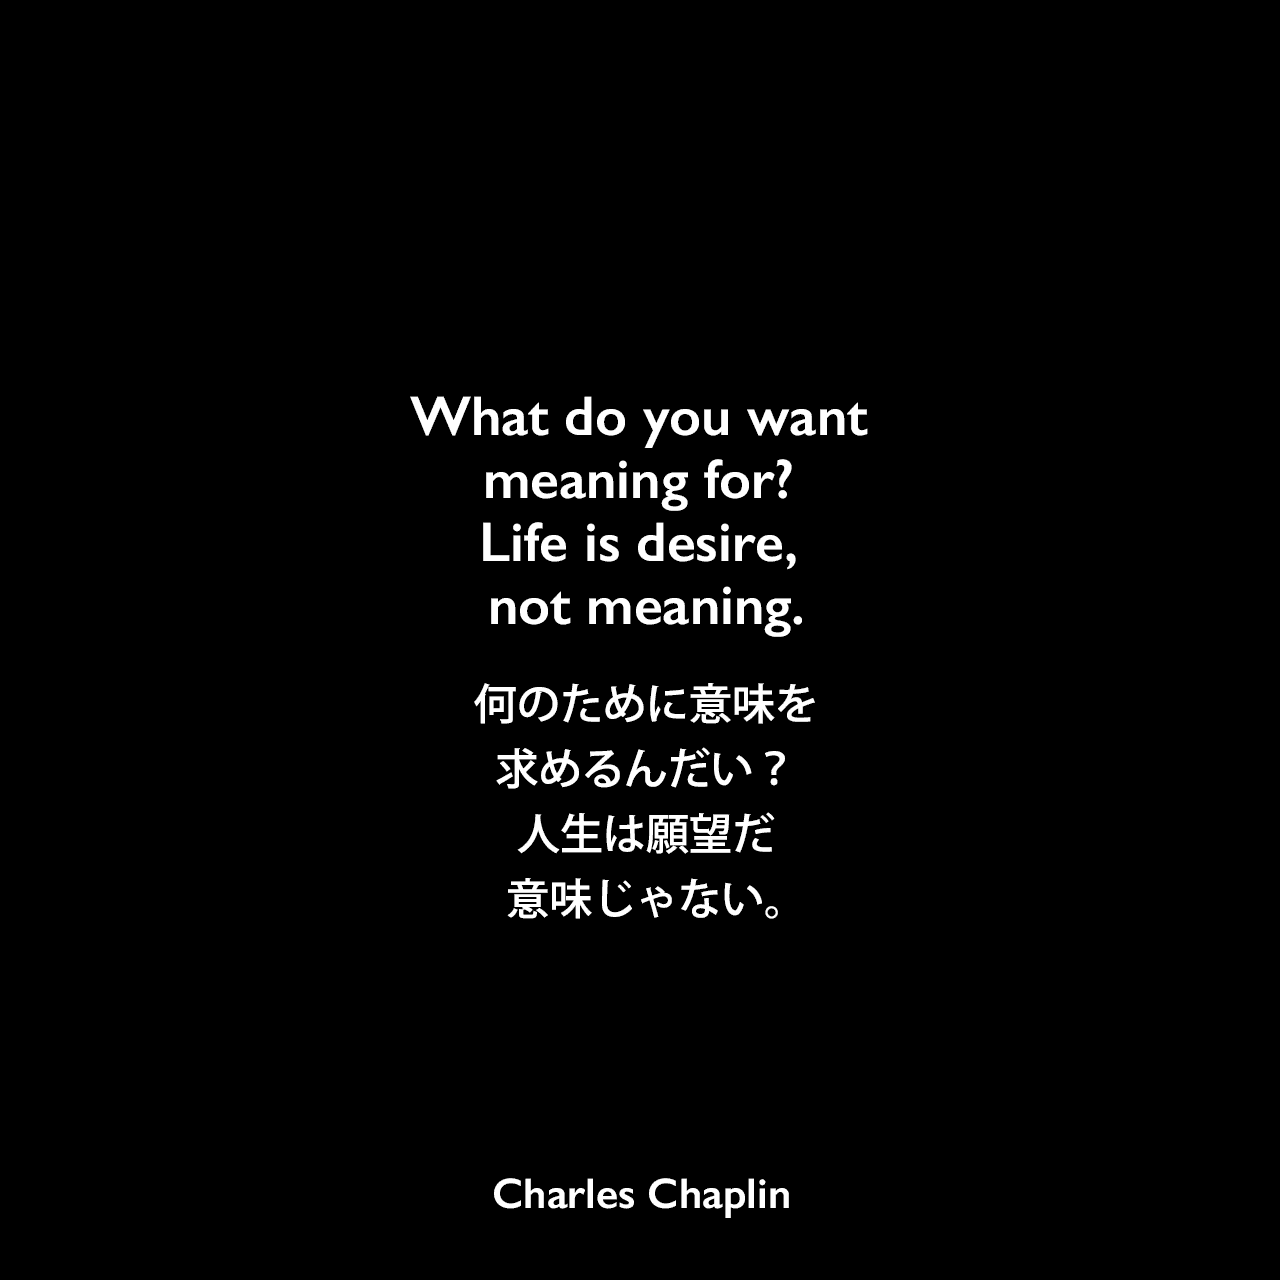 What do you want meaning for? Life is desire, not meaning.何のために意味を求めるんだい？人生は願望だ、意味じゃない。- 映画「ライムライト」のセリフよりCharles Chaplin